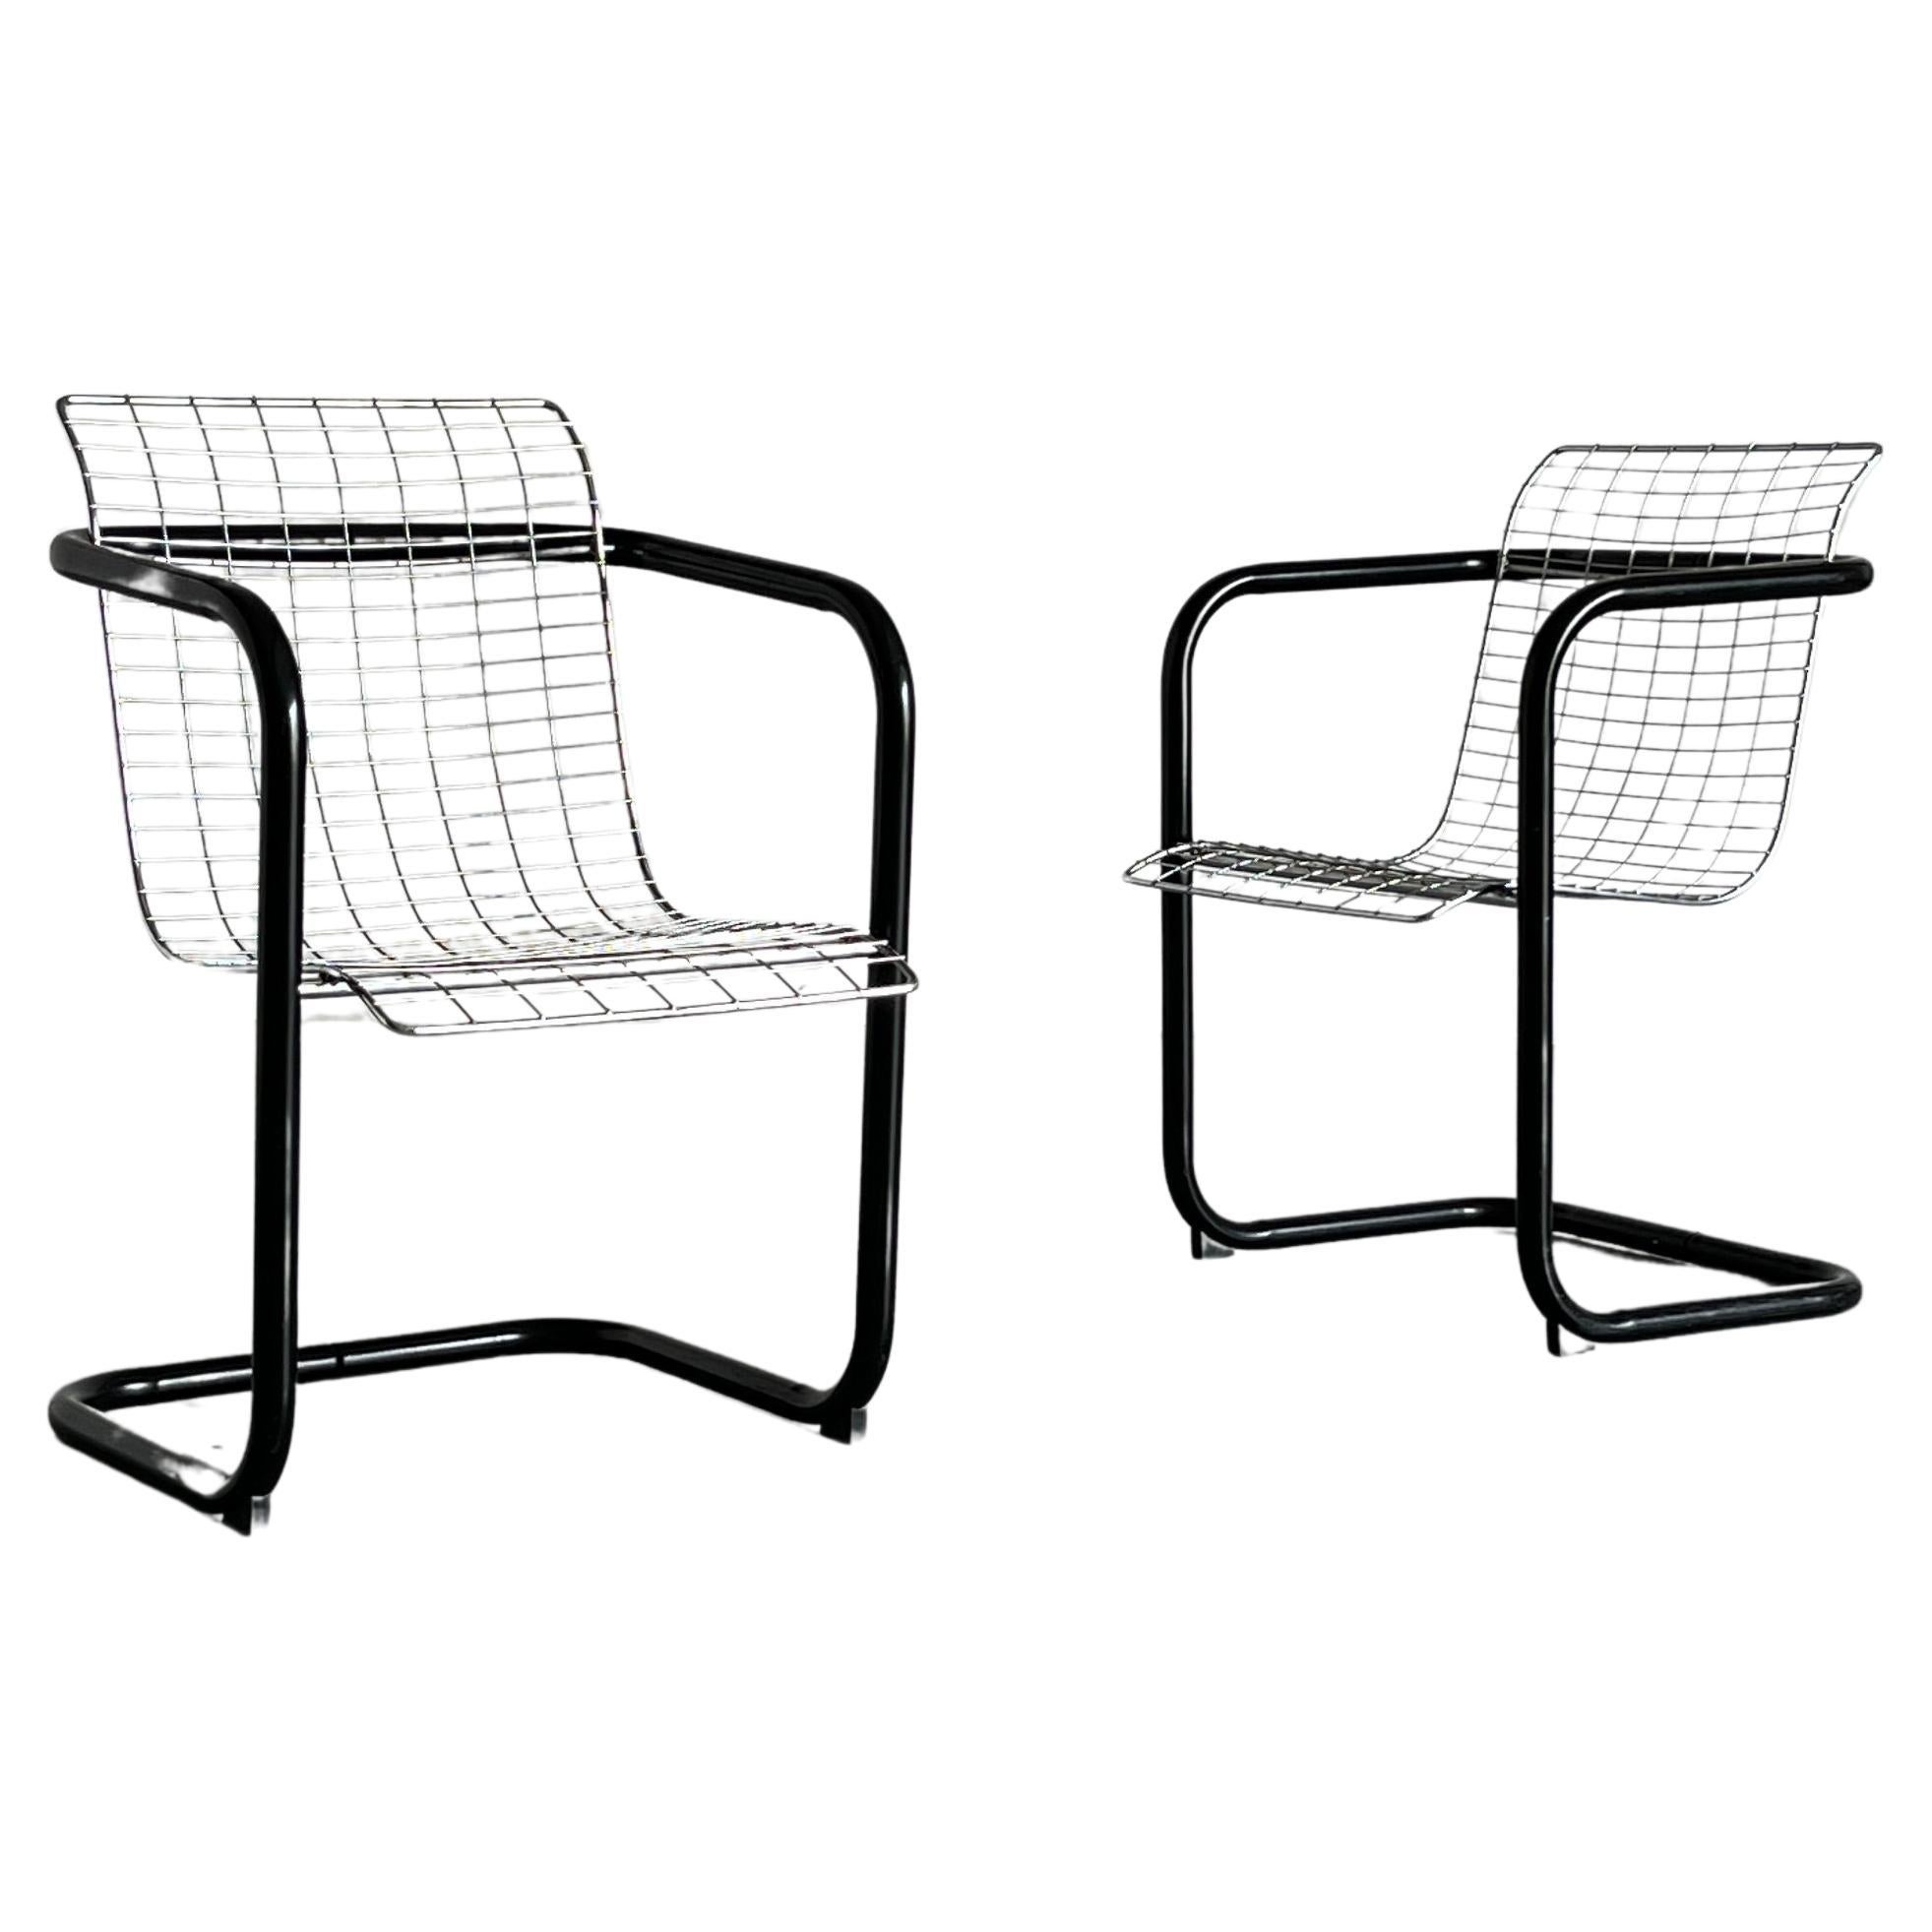 1 of 2 Chromed Wire Club Chairs, Industrial Galvanized Tubular Metal, Italy 80s 